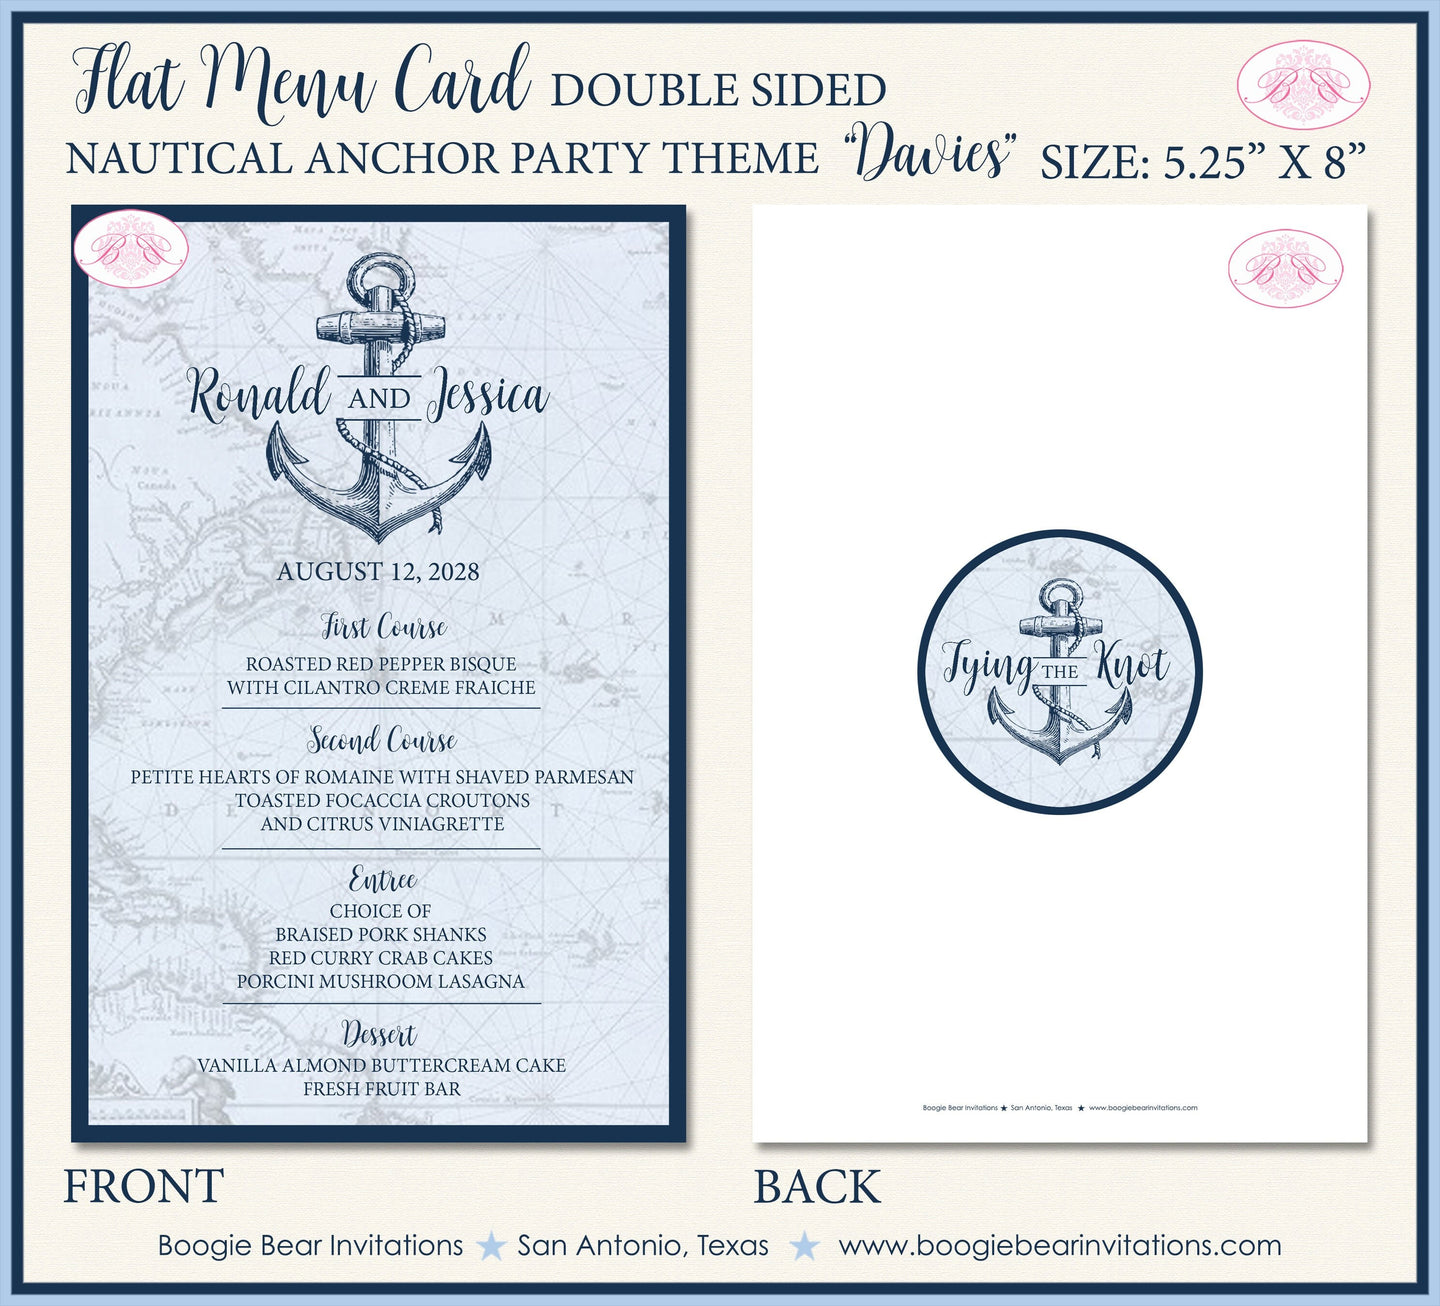 Nautical Anchor Wedding Menu Cards Party Food Entree Plate Dinner Blue Map Tie Knot Boogie Bear Invitations Davies Theme Paperless Printed